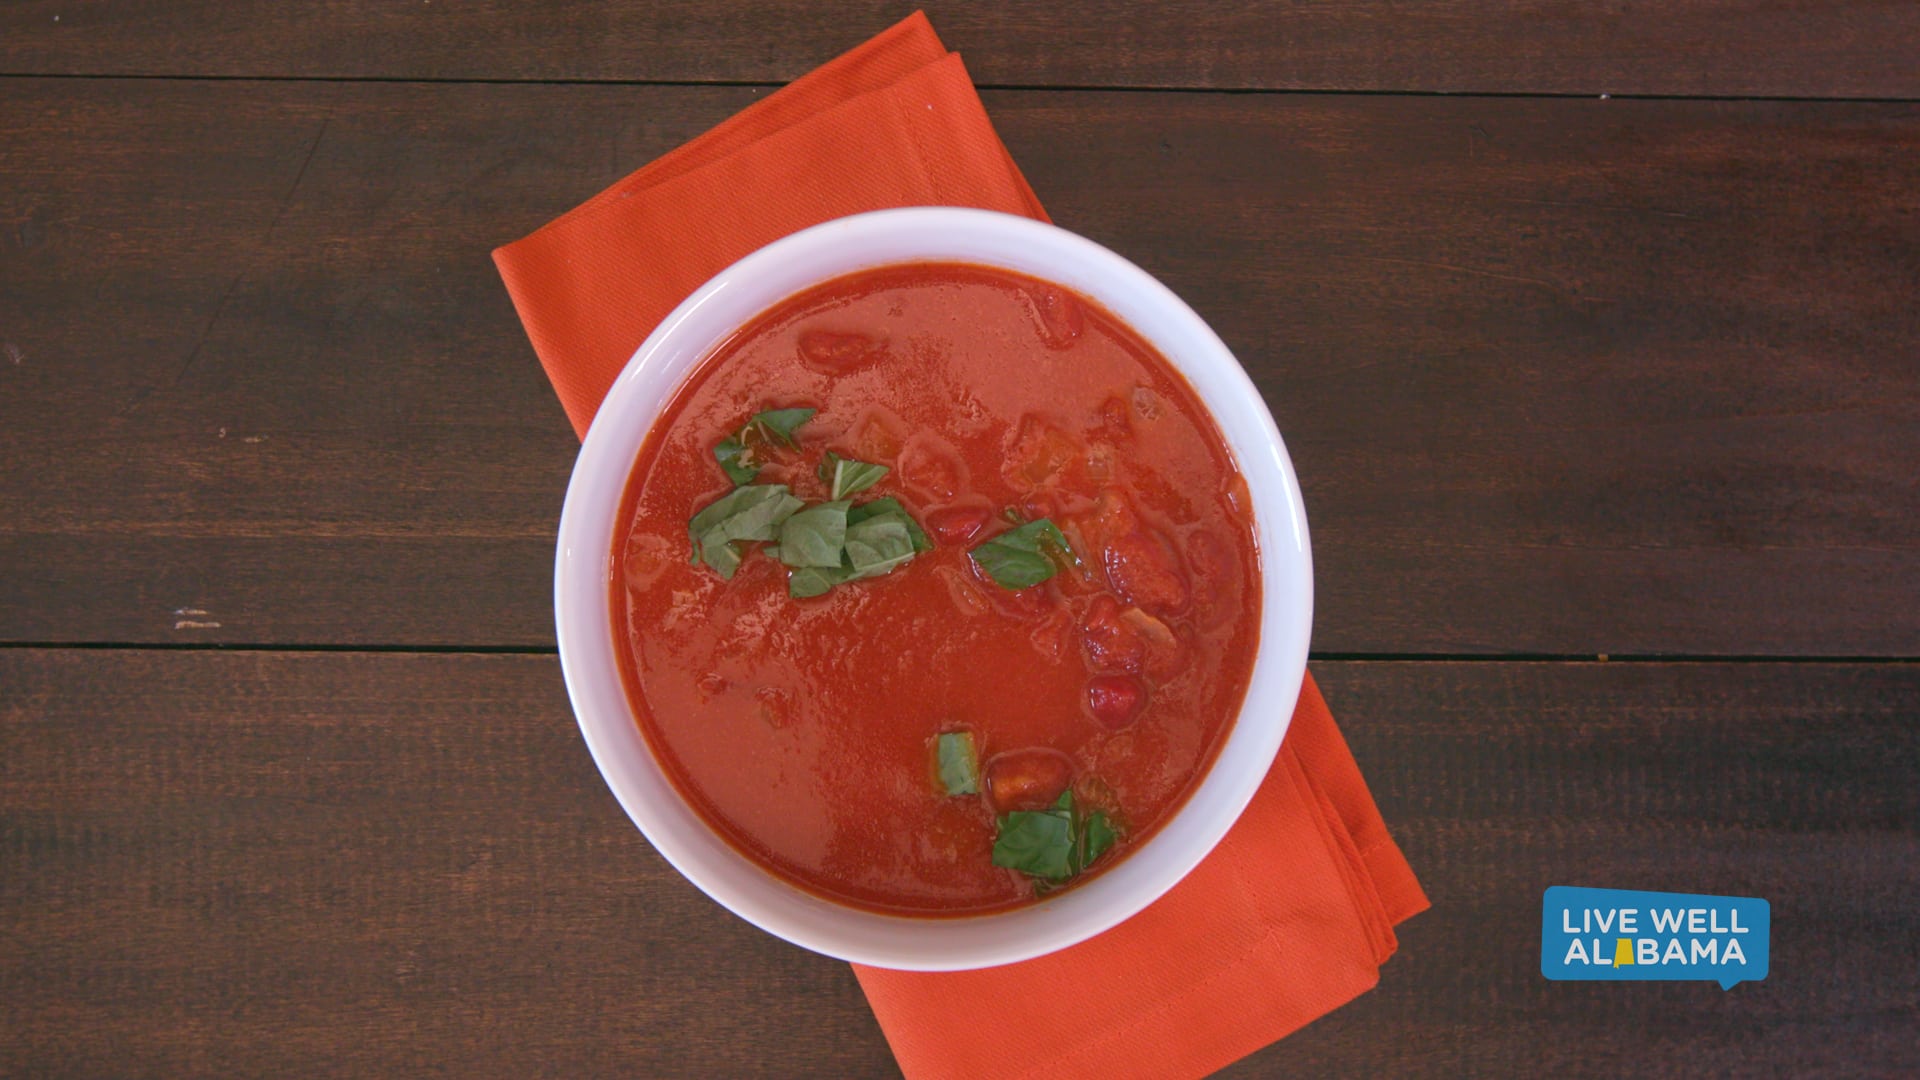 Live Well Family Favorite Tomato Soup